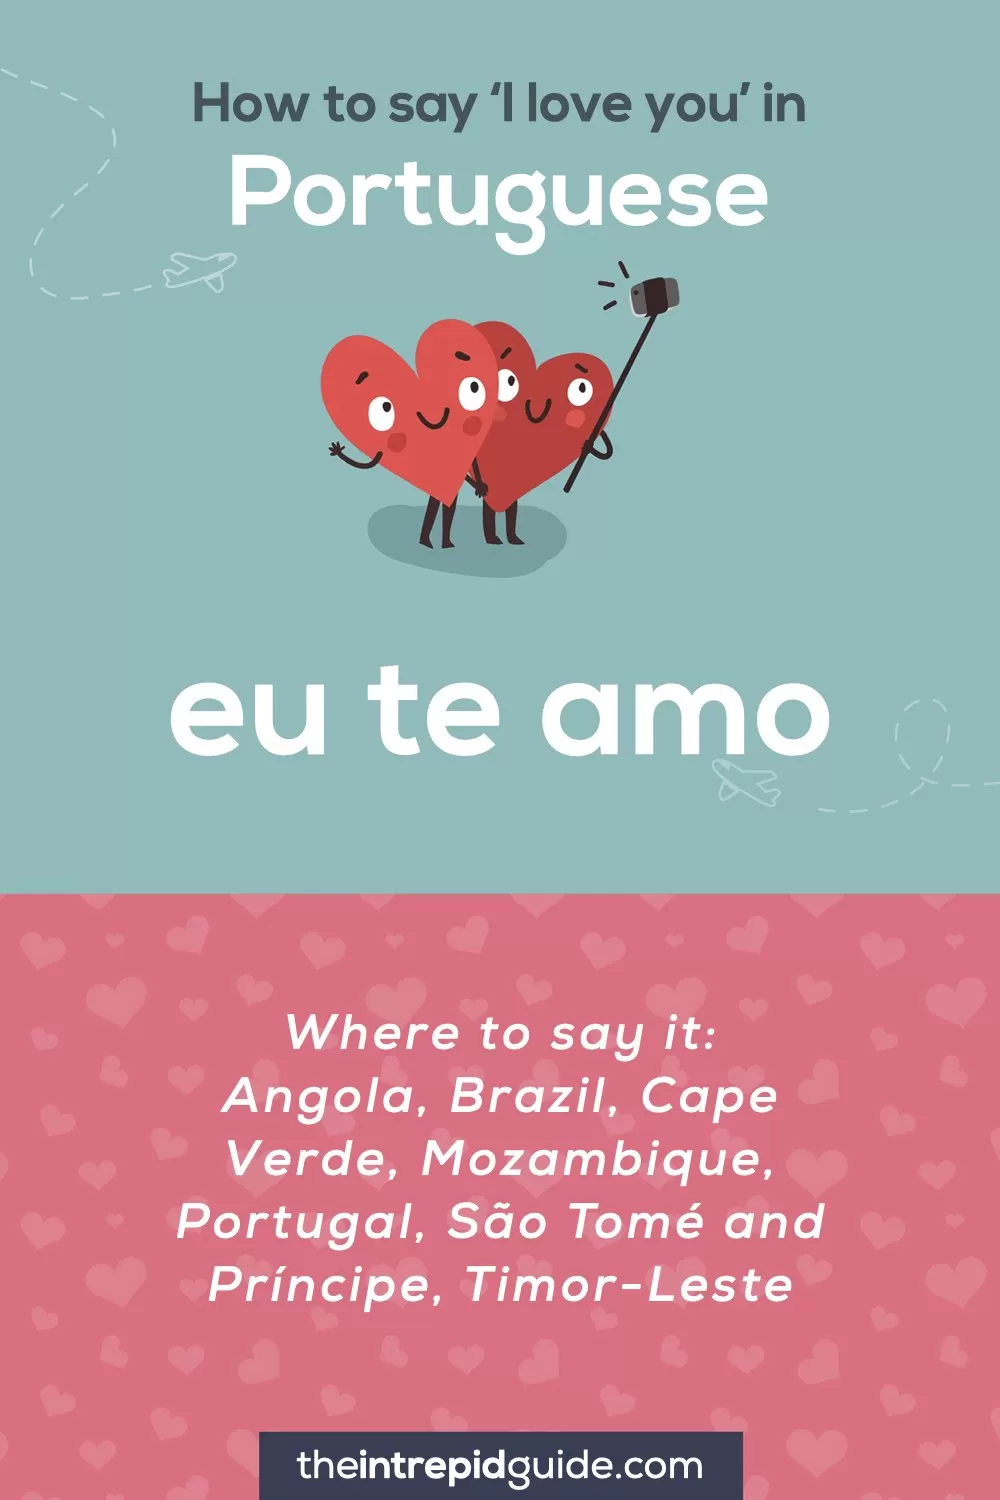 How to say I love you in different languages - Portuguese - eu te amo